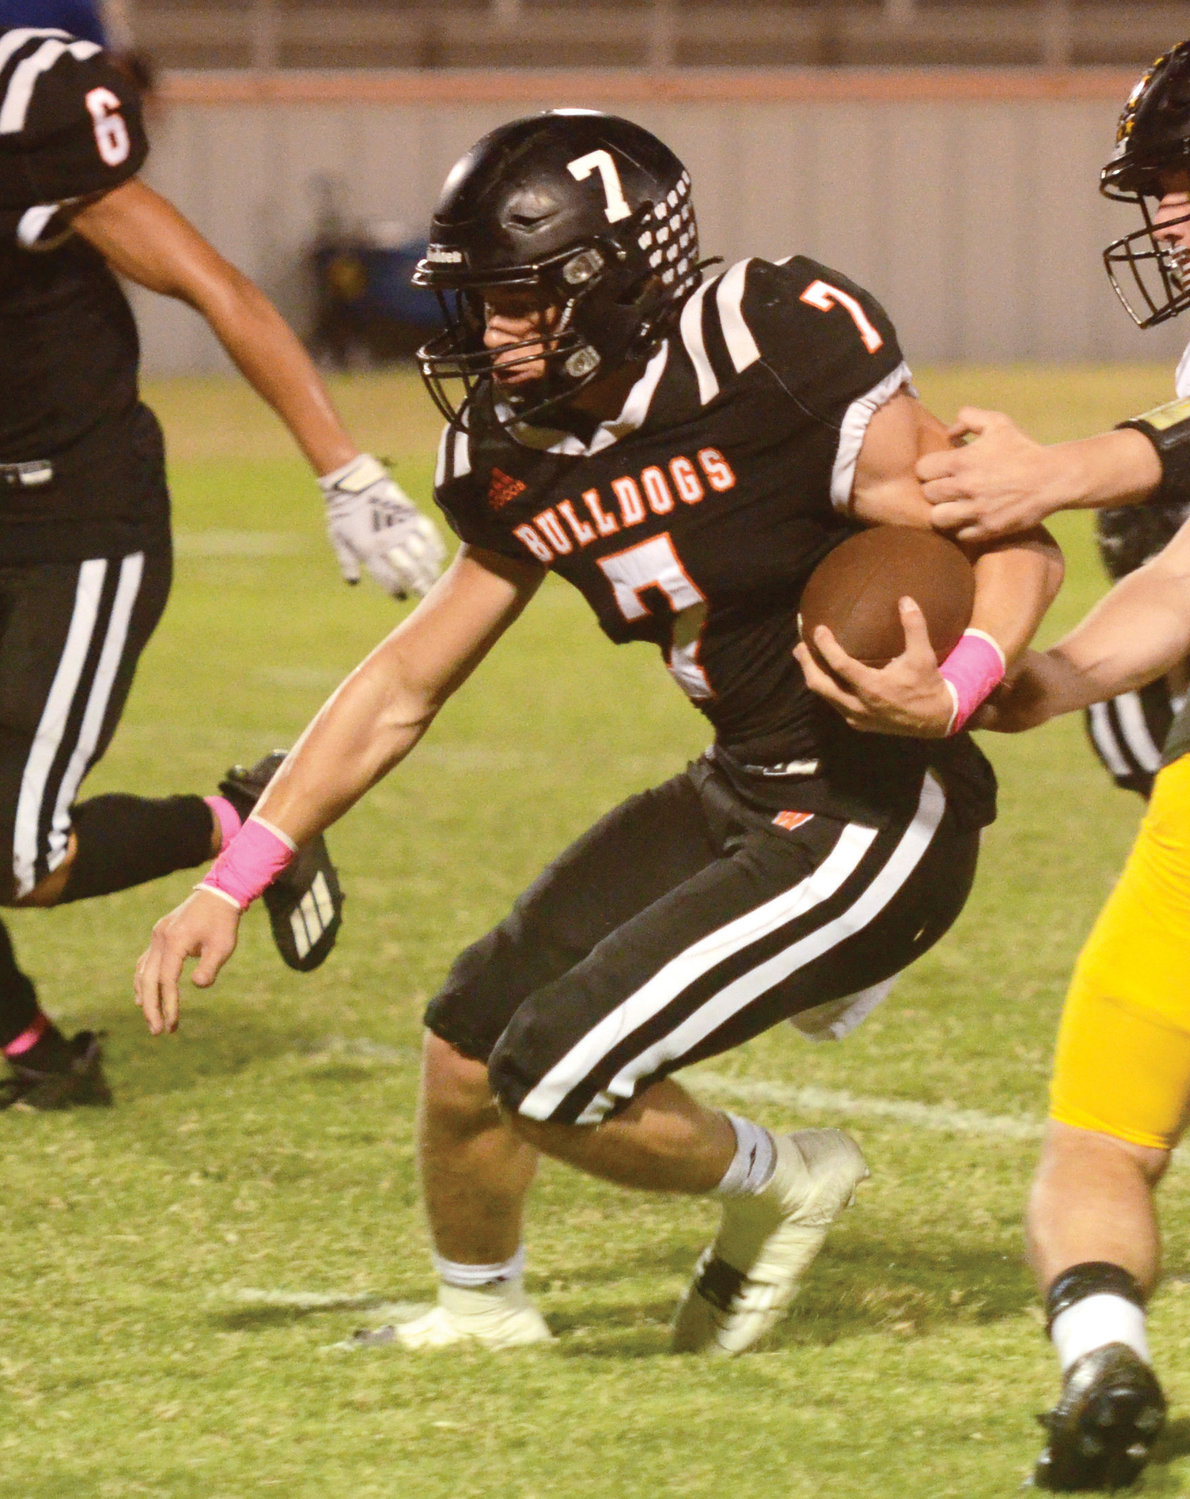 Wayne senior Ethan Mullins carries the ball for some of his 230 rushing yards Thursday night during the Bulldogs’ 51-0 win over the Demons. Mullins also threw for 129 yards and finished the night with seven touchdowns.